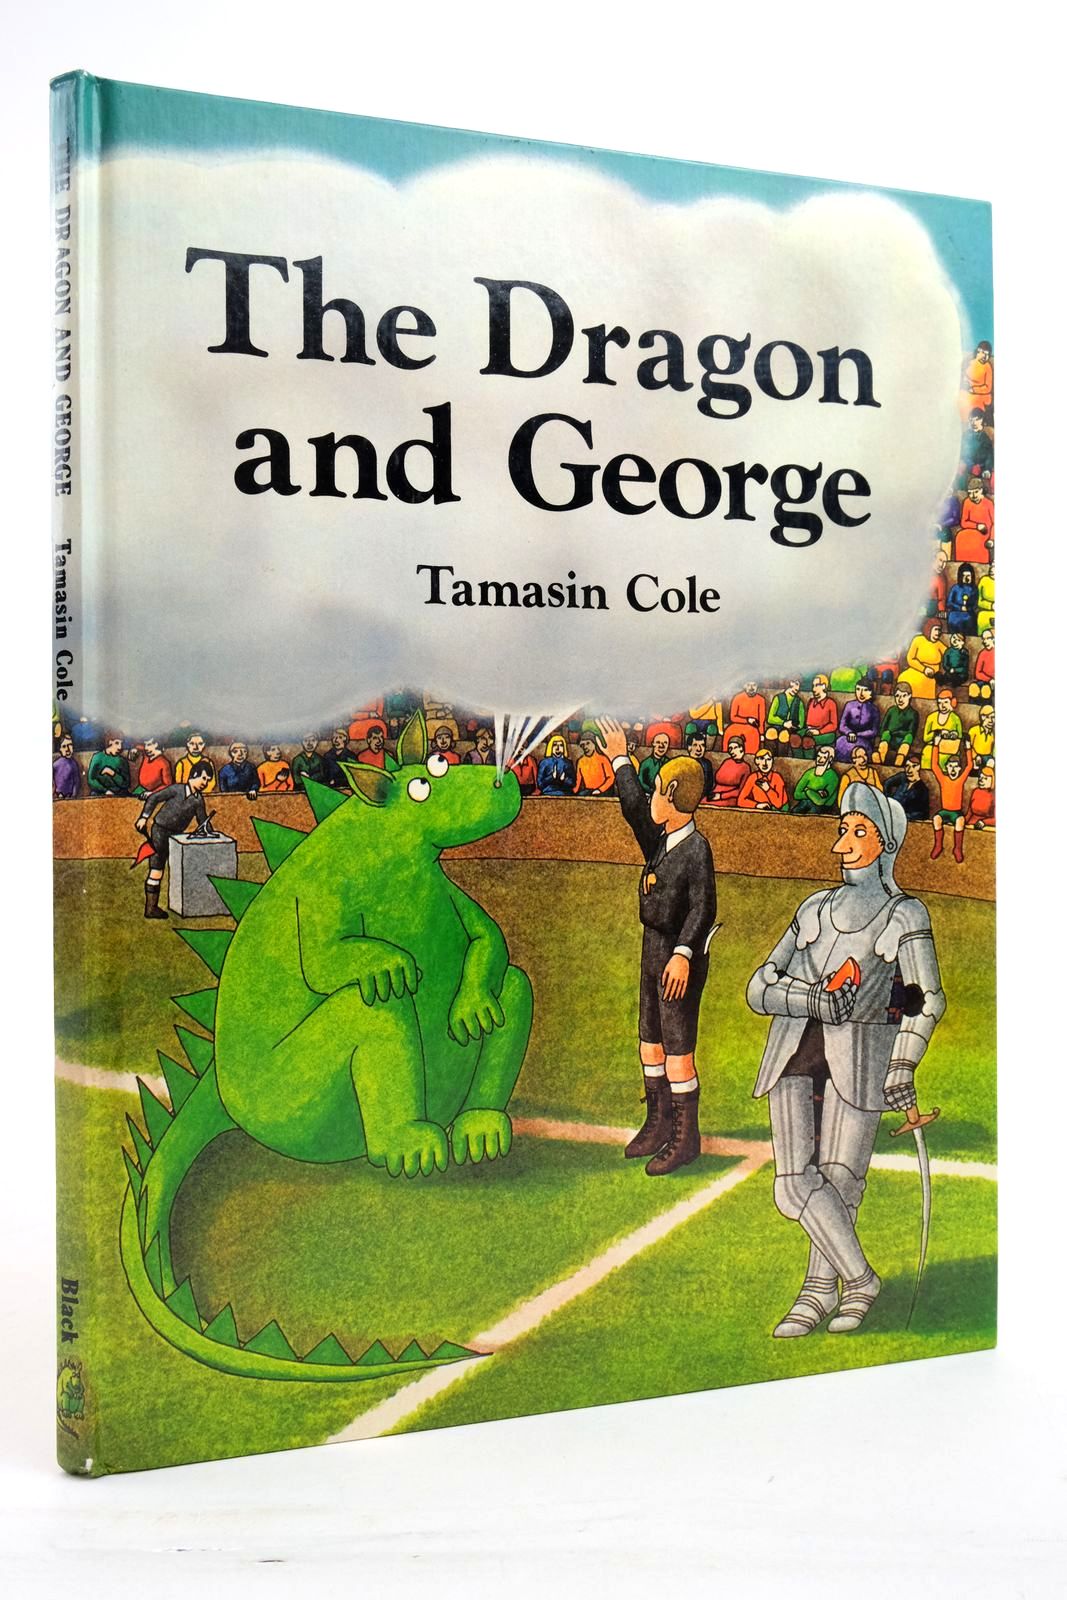 Photo of THE DRAGON AND GEORGE written by Cressey, James illustrated by Cole, Tamasin published by Adam &amp; Charles Black (STOCK CODE: 2137167)  for sale by Stella & Rose's Books